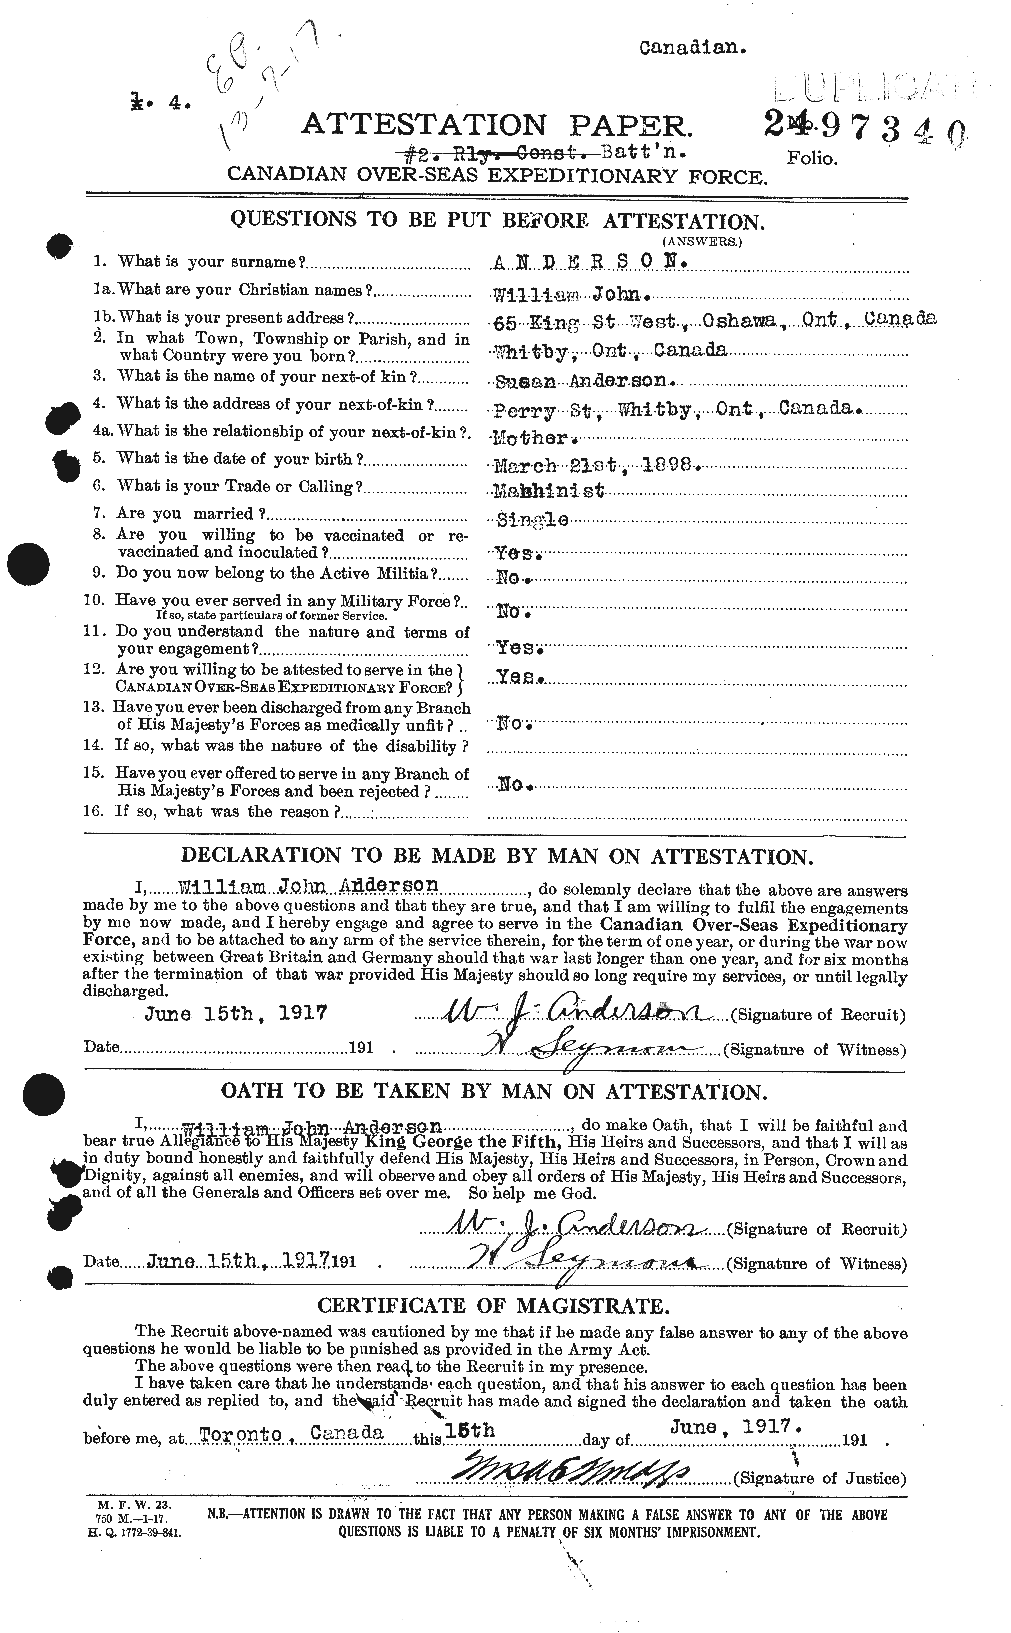 Personnel Records of the First World War - CEF 210697a